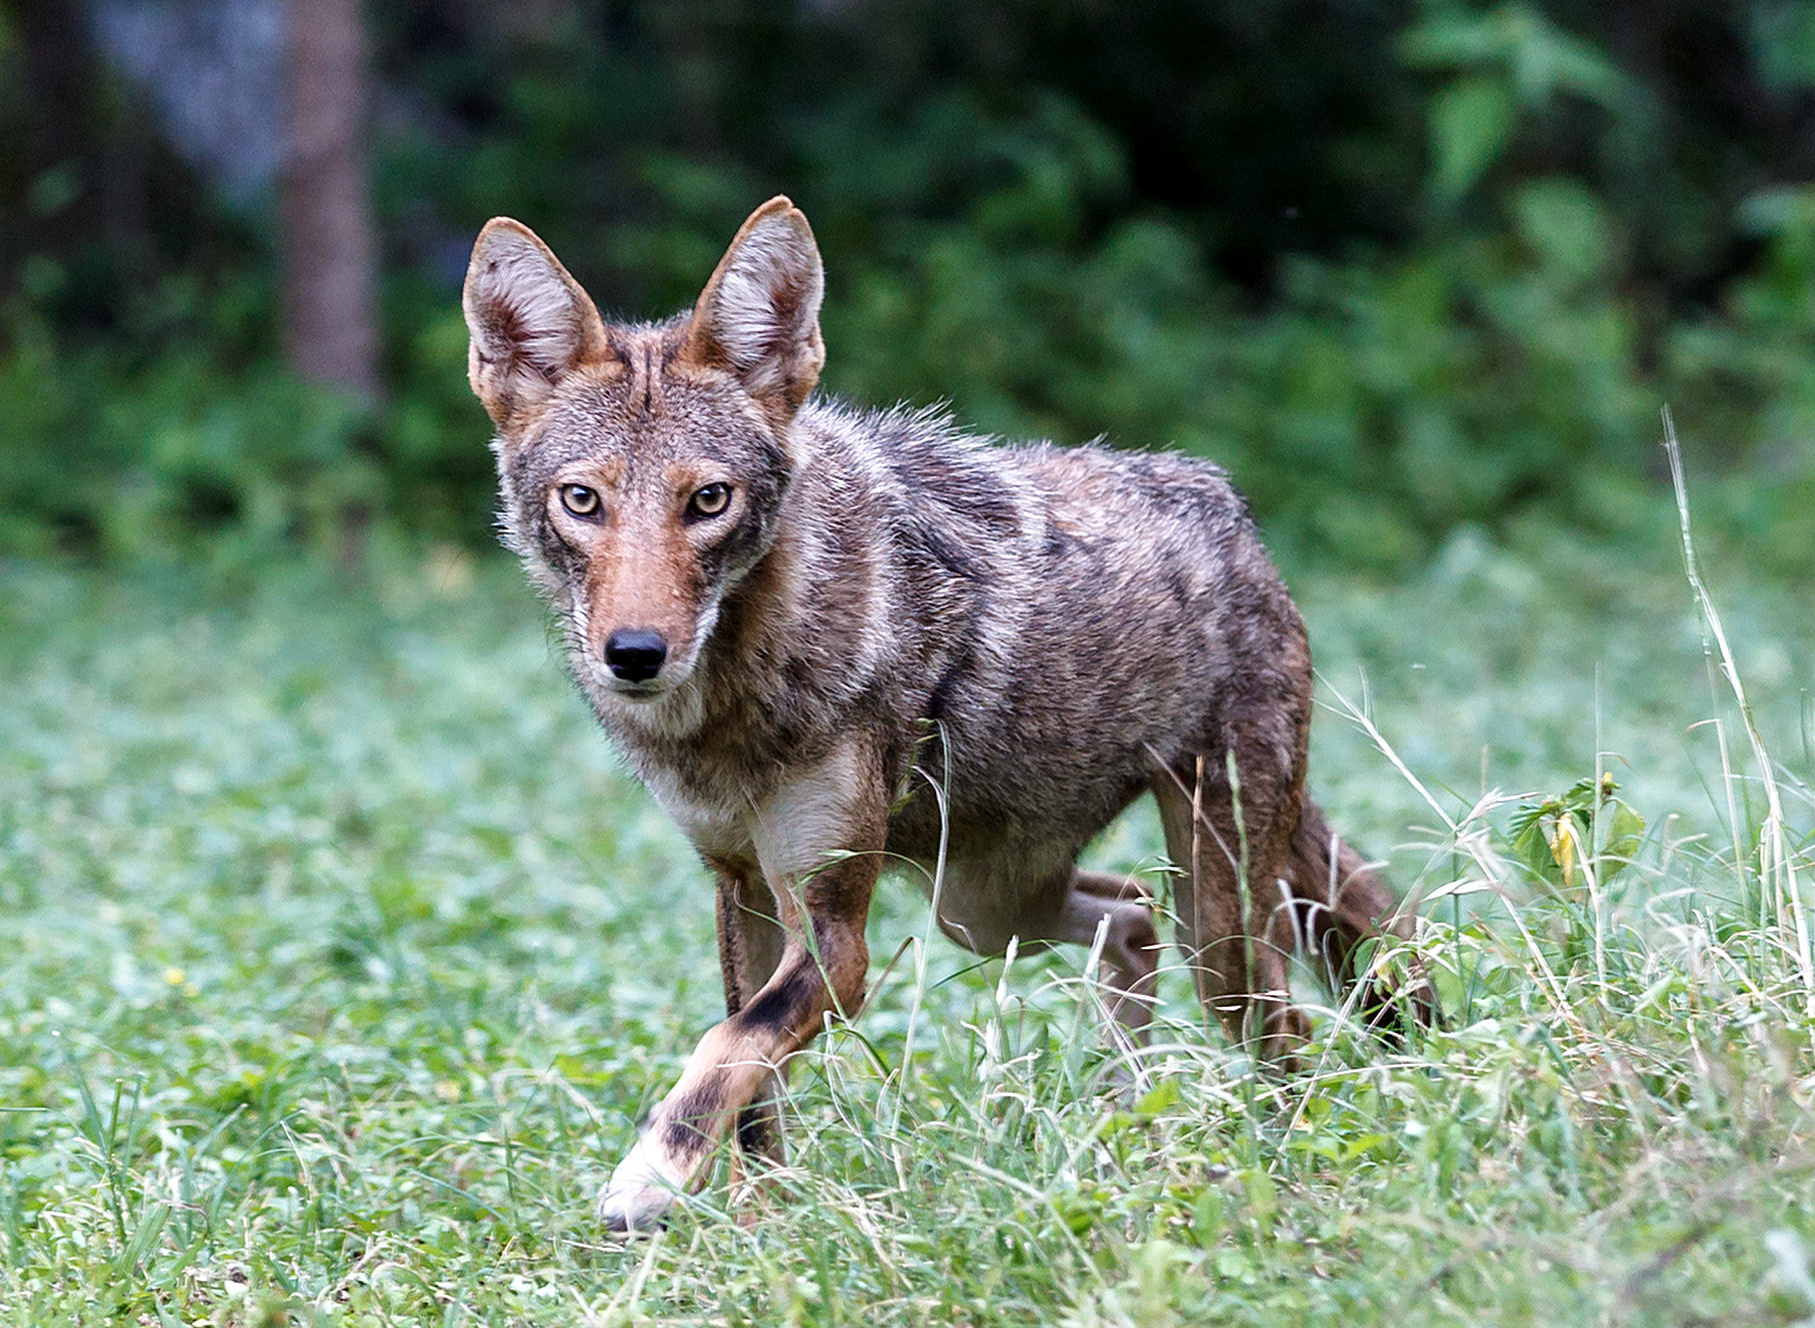 Terrell Hills officials: Don't panic over coyote sightings